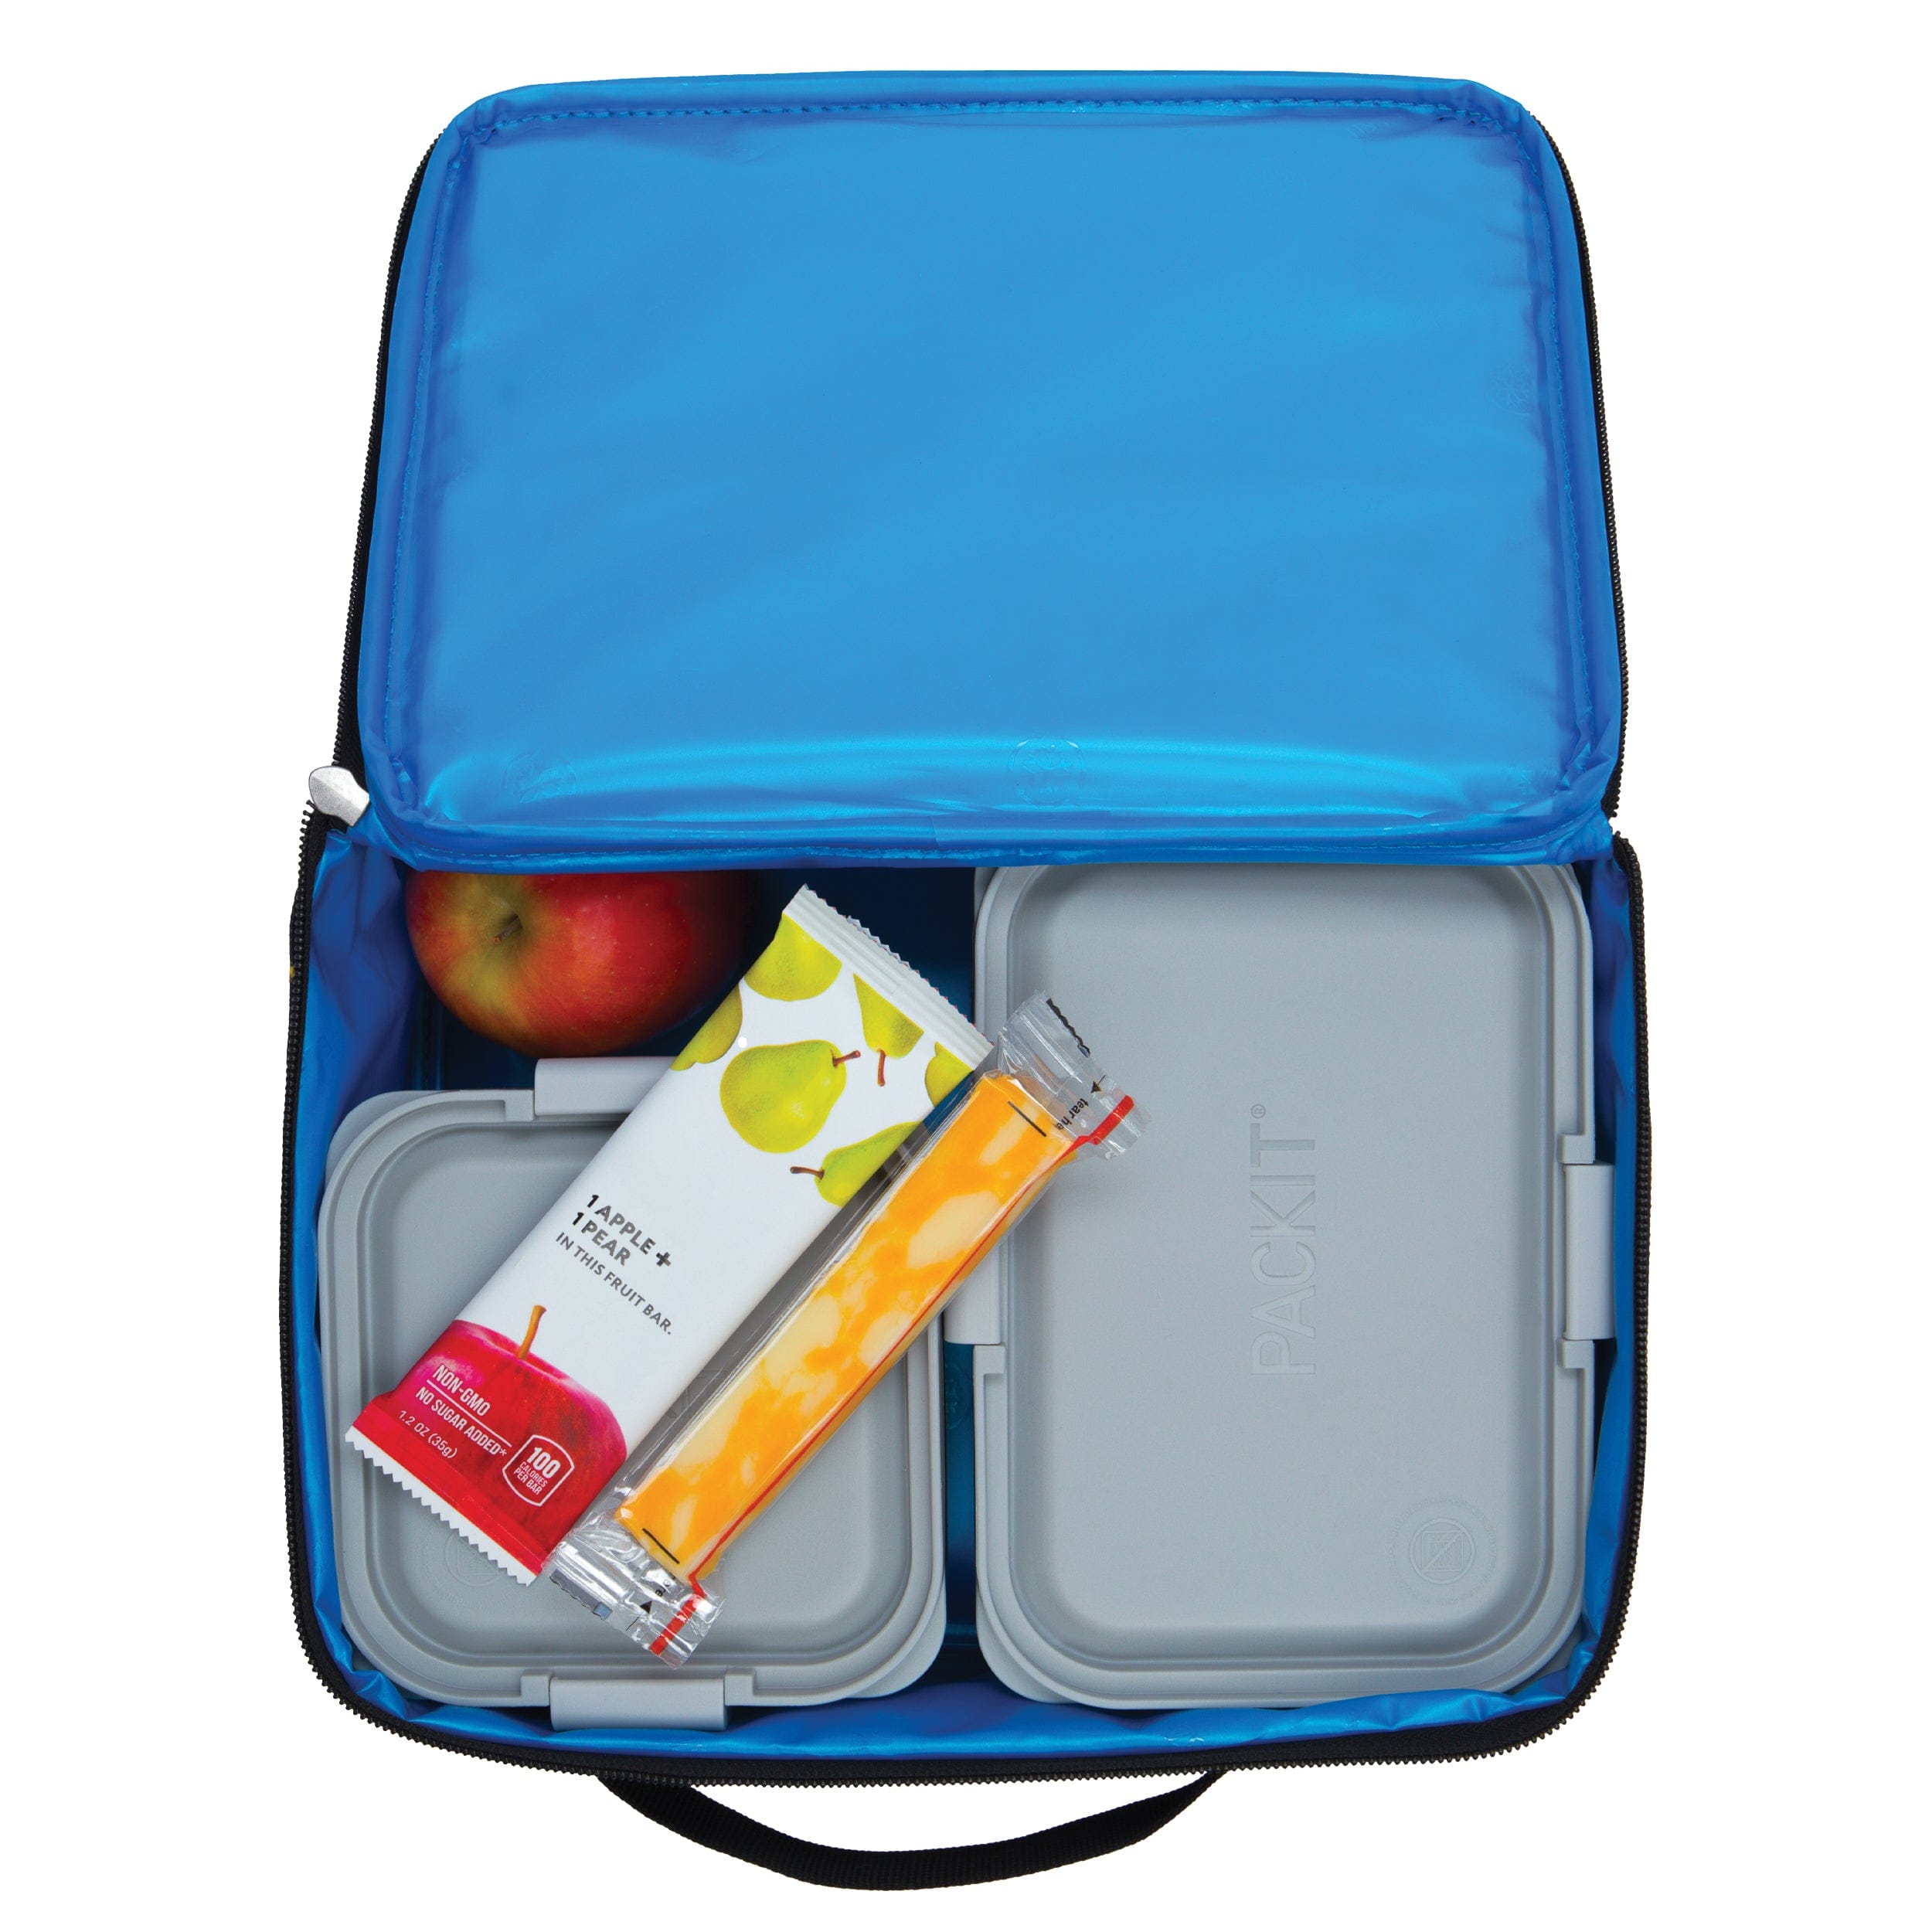 PackIt Freezable Classic Lunch Box, Paper Triangles